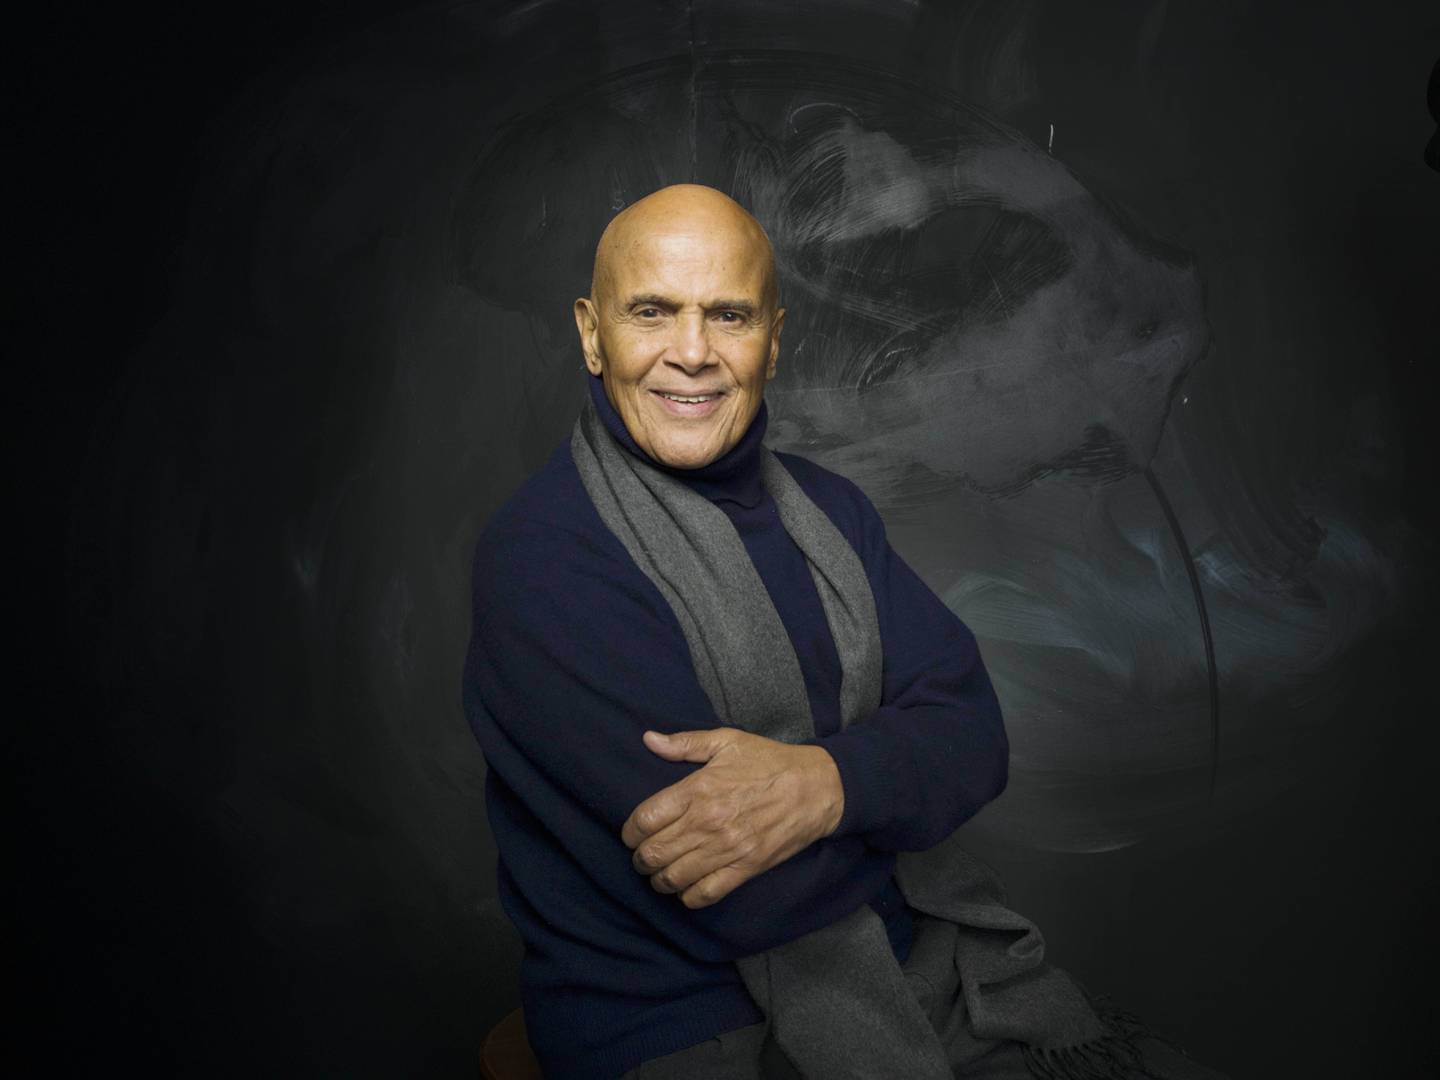 FILE - Actor, singer and activist Harry Belafonte from the documentary film "Sing Your Song," poses for a portrait during the Sundance Film Festival in Park City, Utah on Jan. 21, 2011. Belafonte died Tuesday of congestive heart failure at his New York home. He was 96.